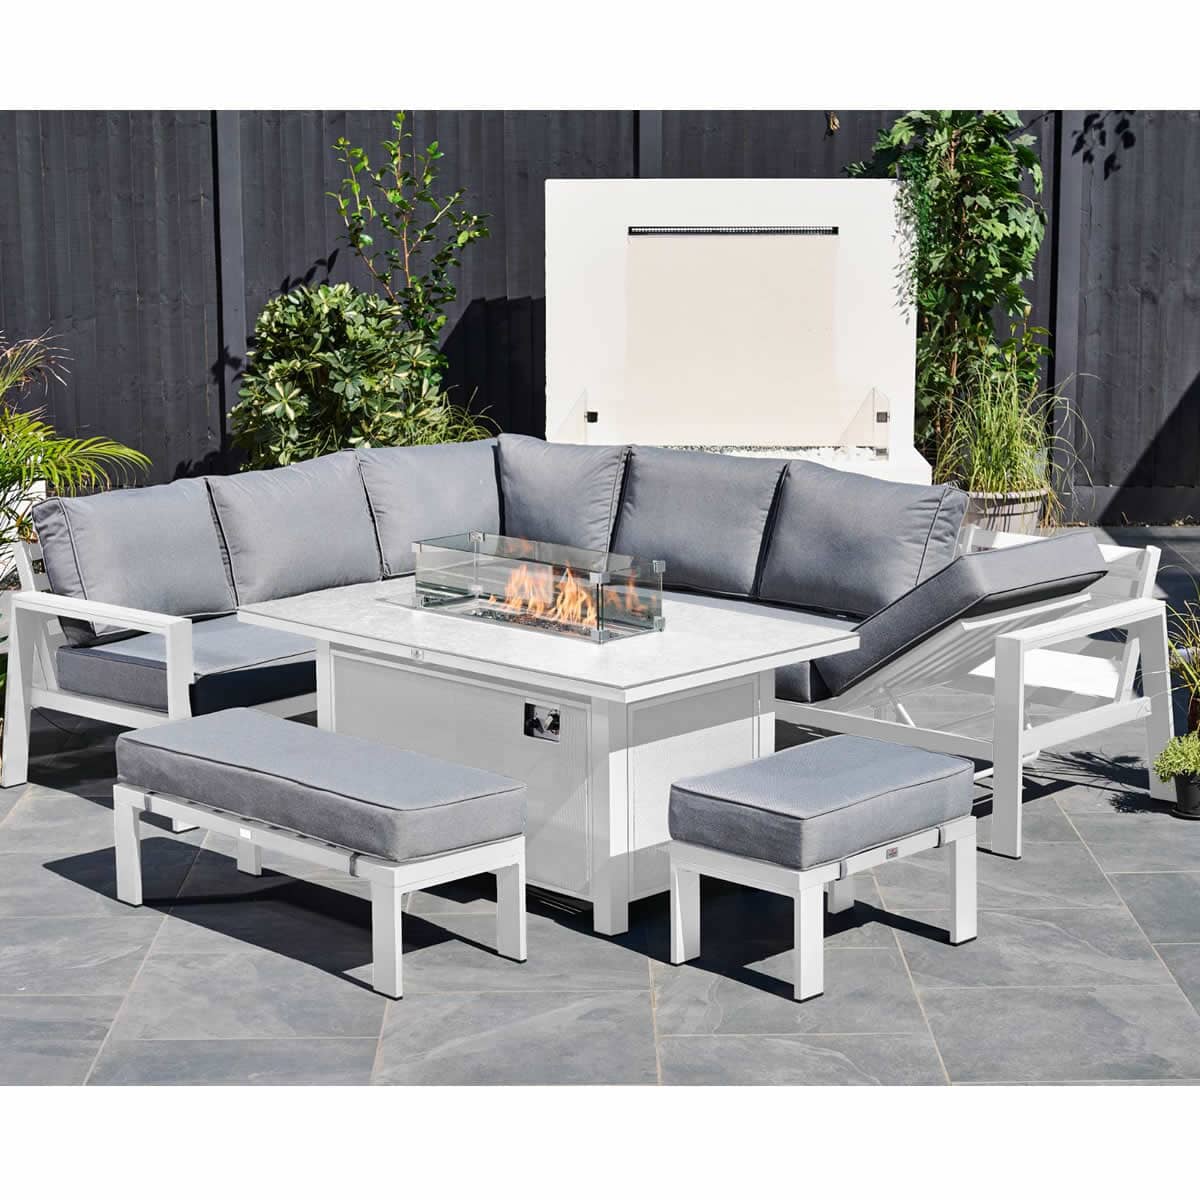 Supremo Melbury Corner Sofa Lounge Set with Reclining Chaise and Rectangular Firepit Table Sandstorm